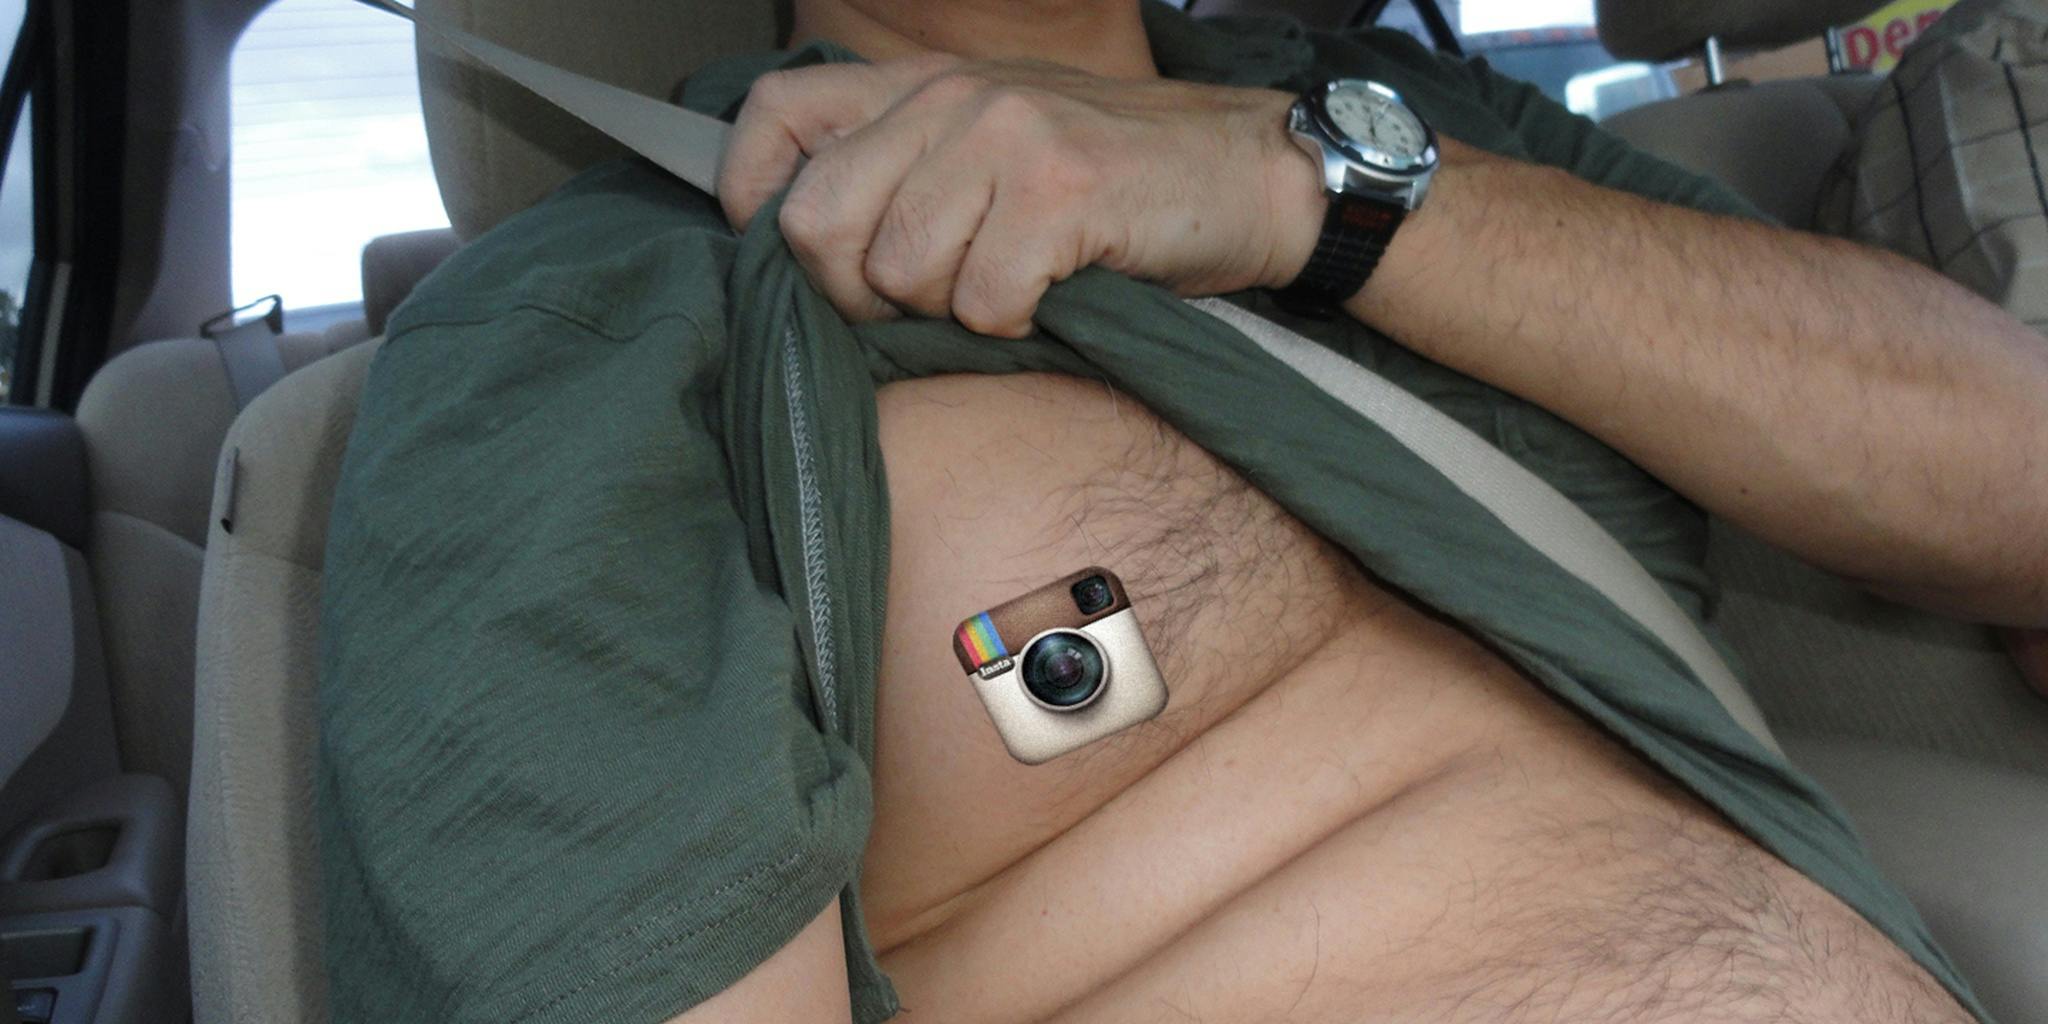 This dude found a brilliant way to test Instagram’s nipple censorship